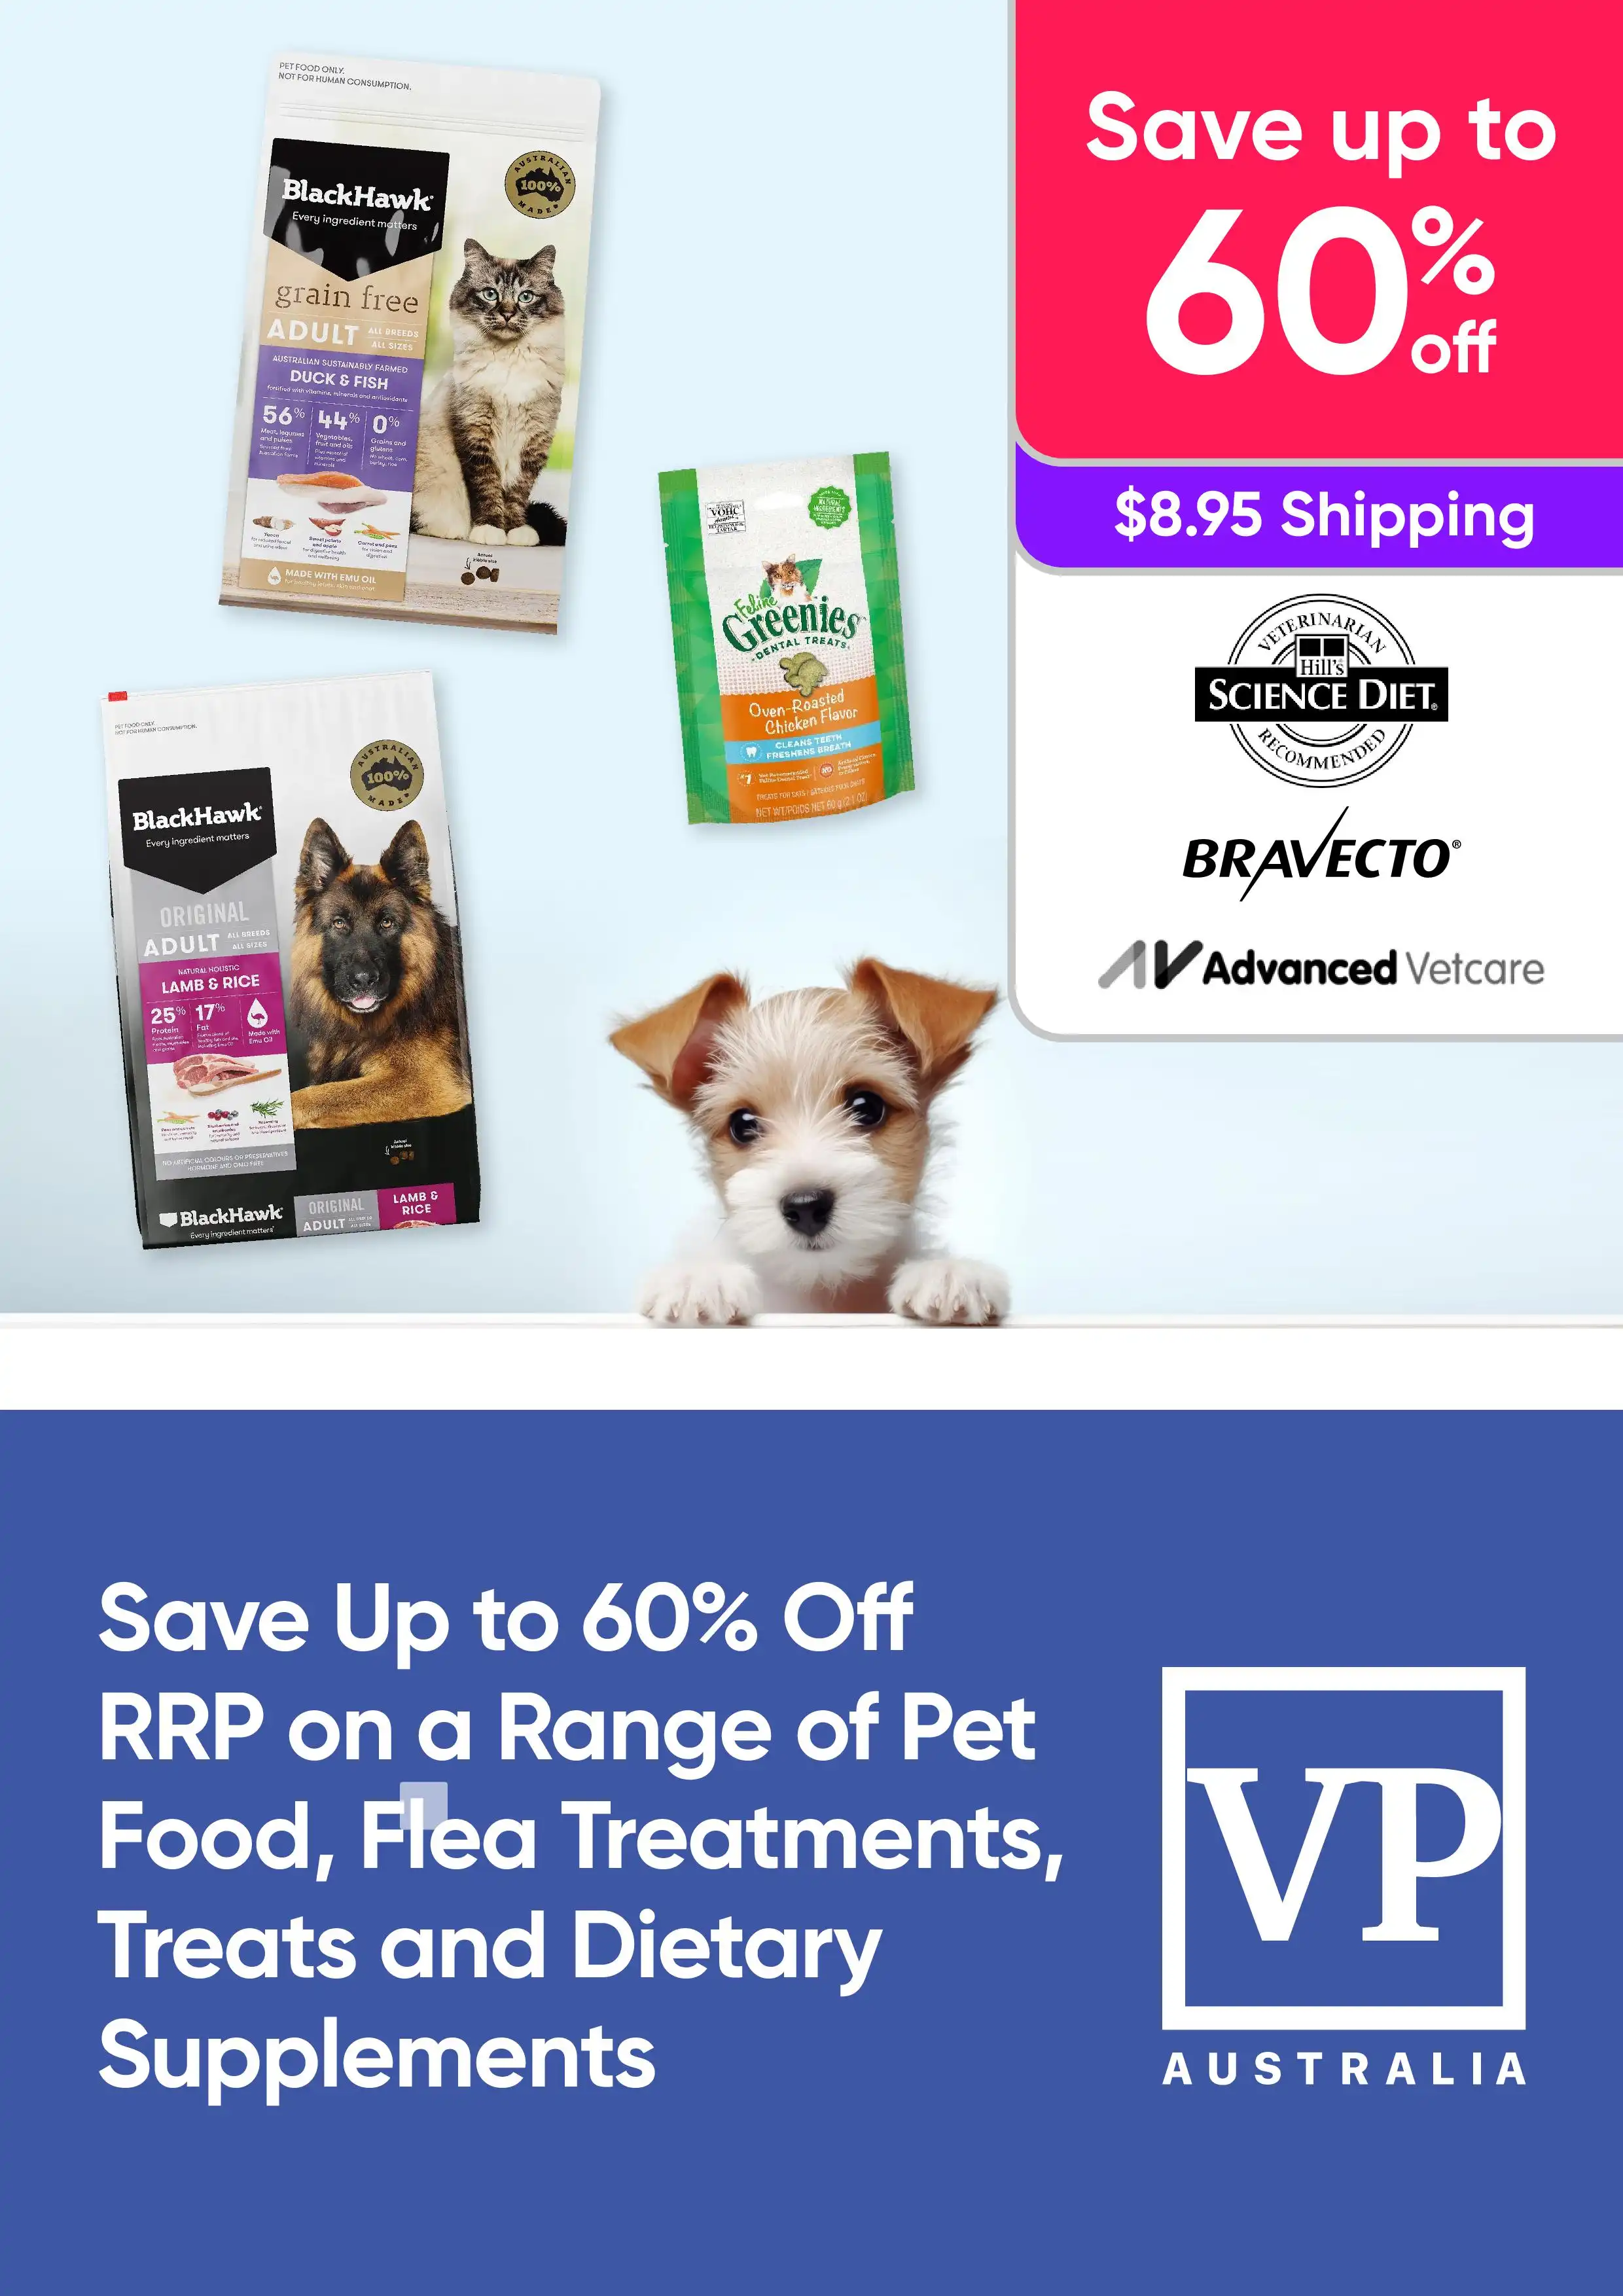 Save Up to 60% Off RRP on a Range of Pet Food, Flea Treatments, Treats and Dietary Supplements